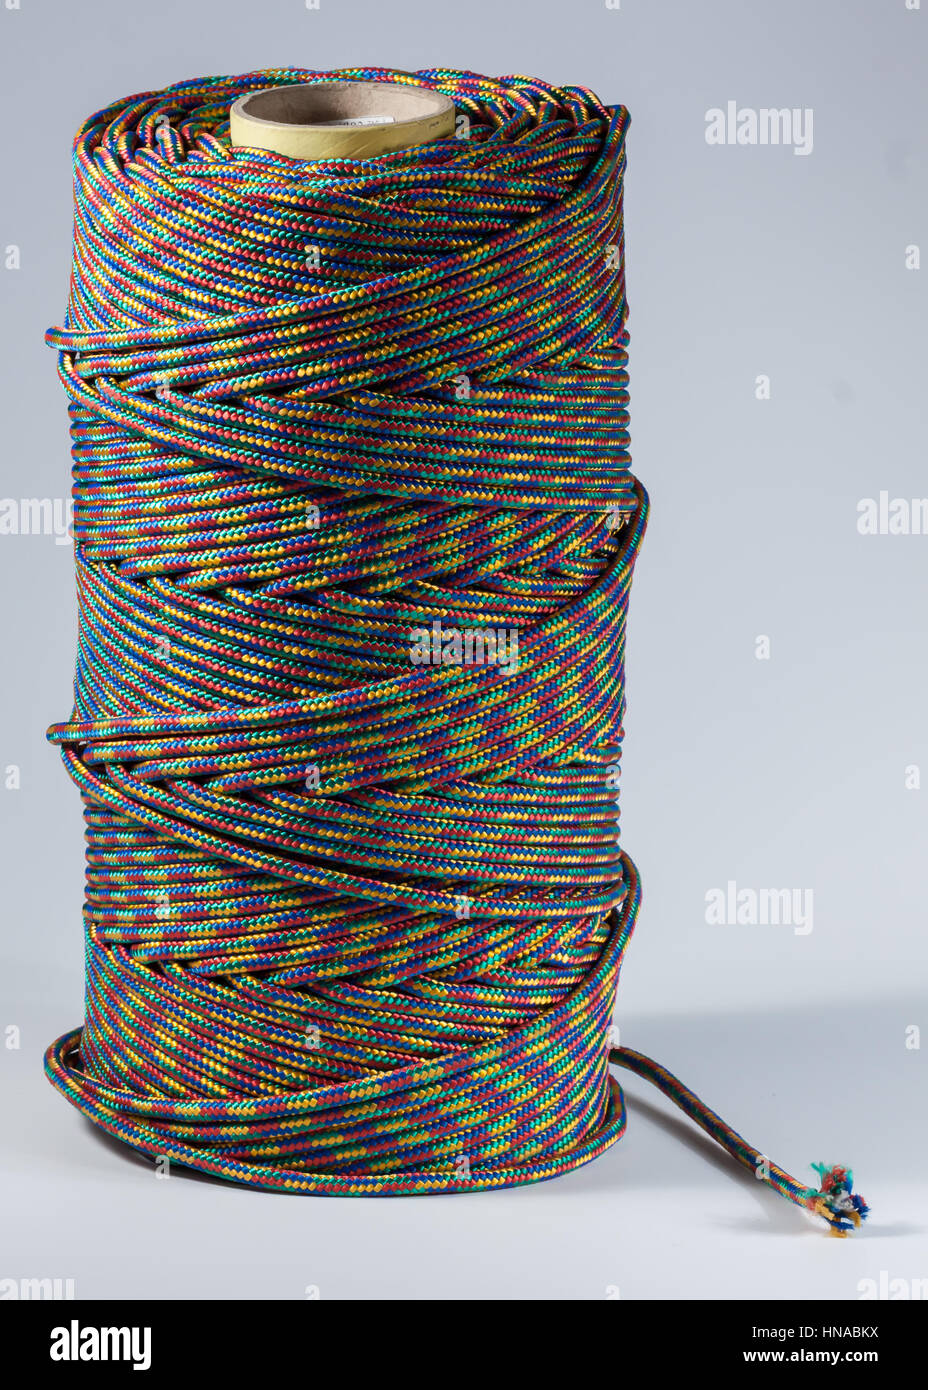 coil of rope on white background colored rope Stock Photo